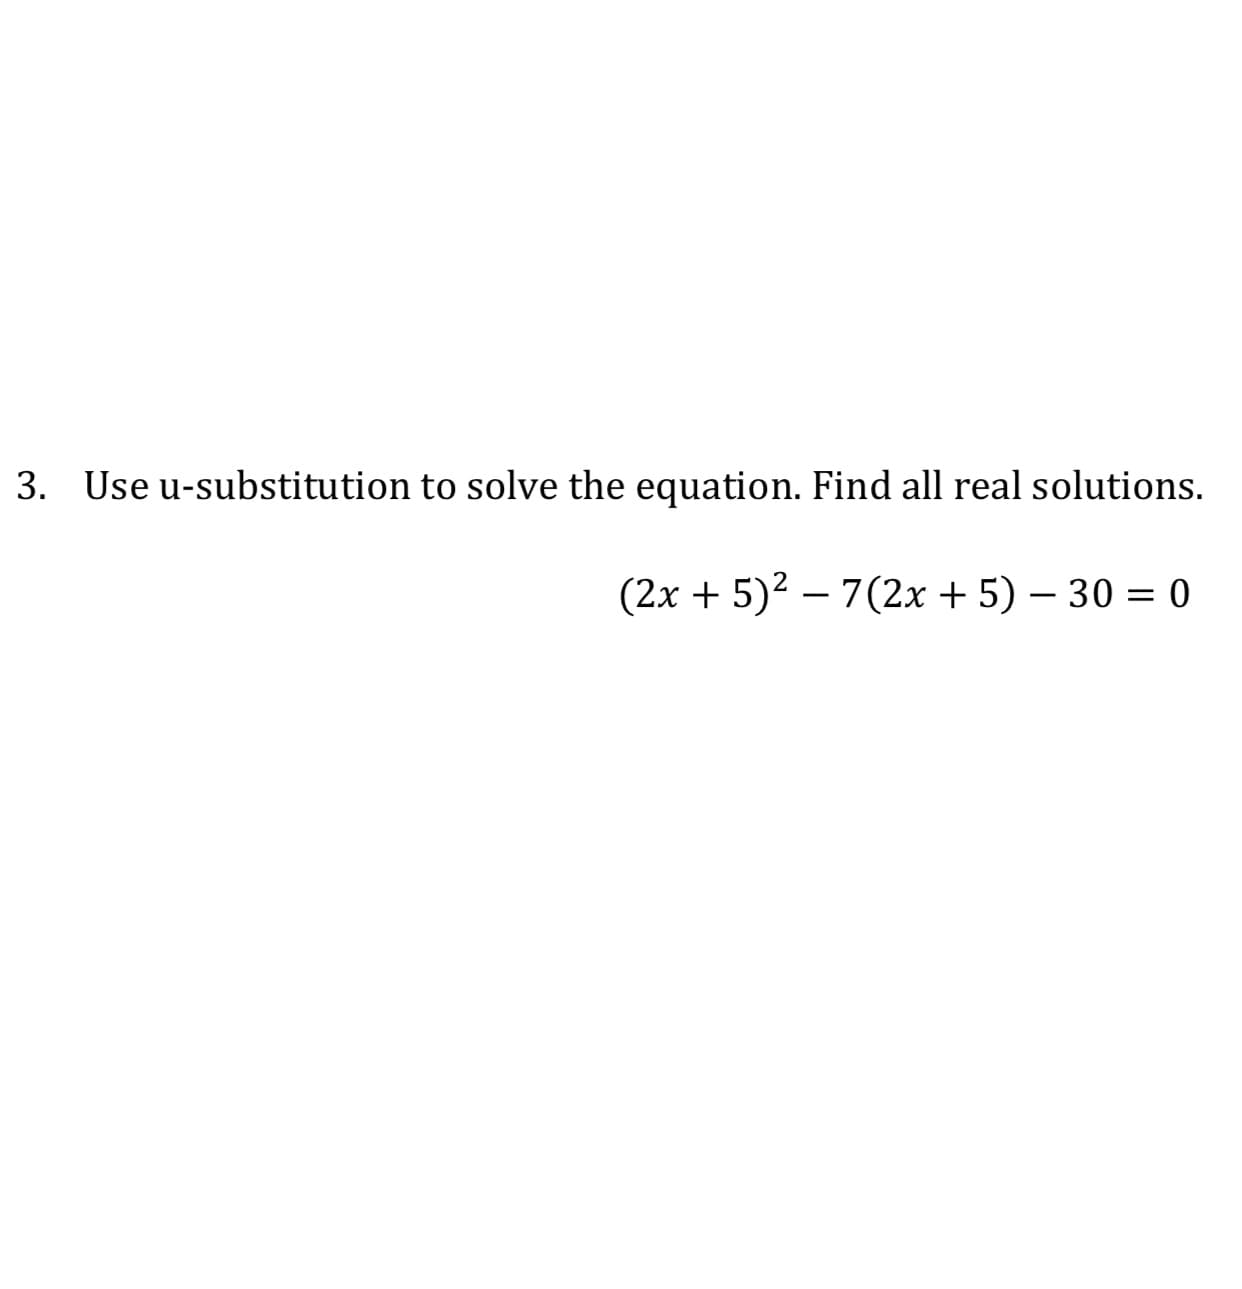 3.
Use u-substitution to solve the equation. Find all real solutions.
(2x + 5)² – 7(2x + 5) – 30 = 0
